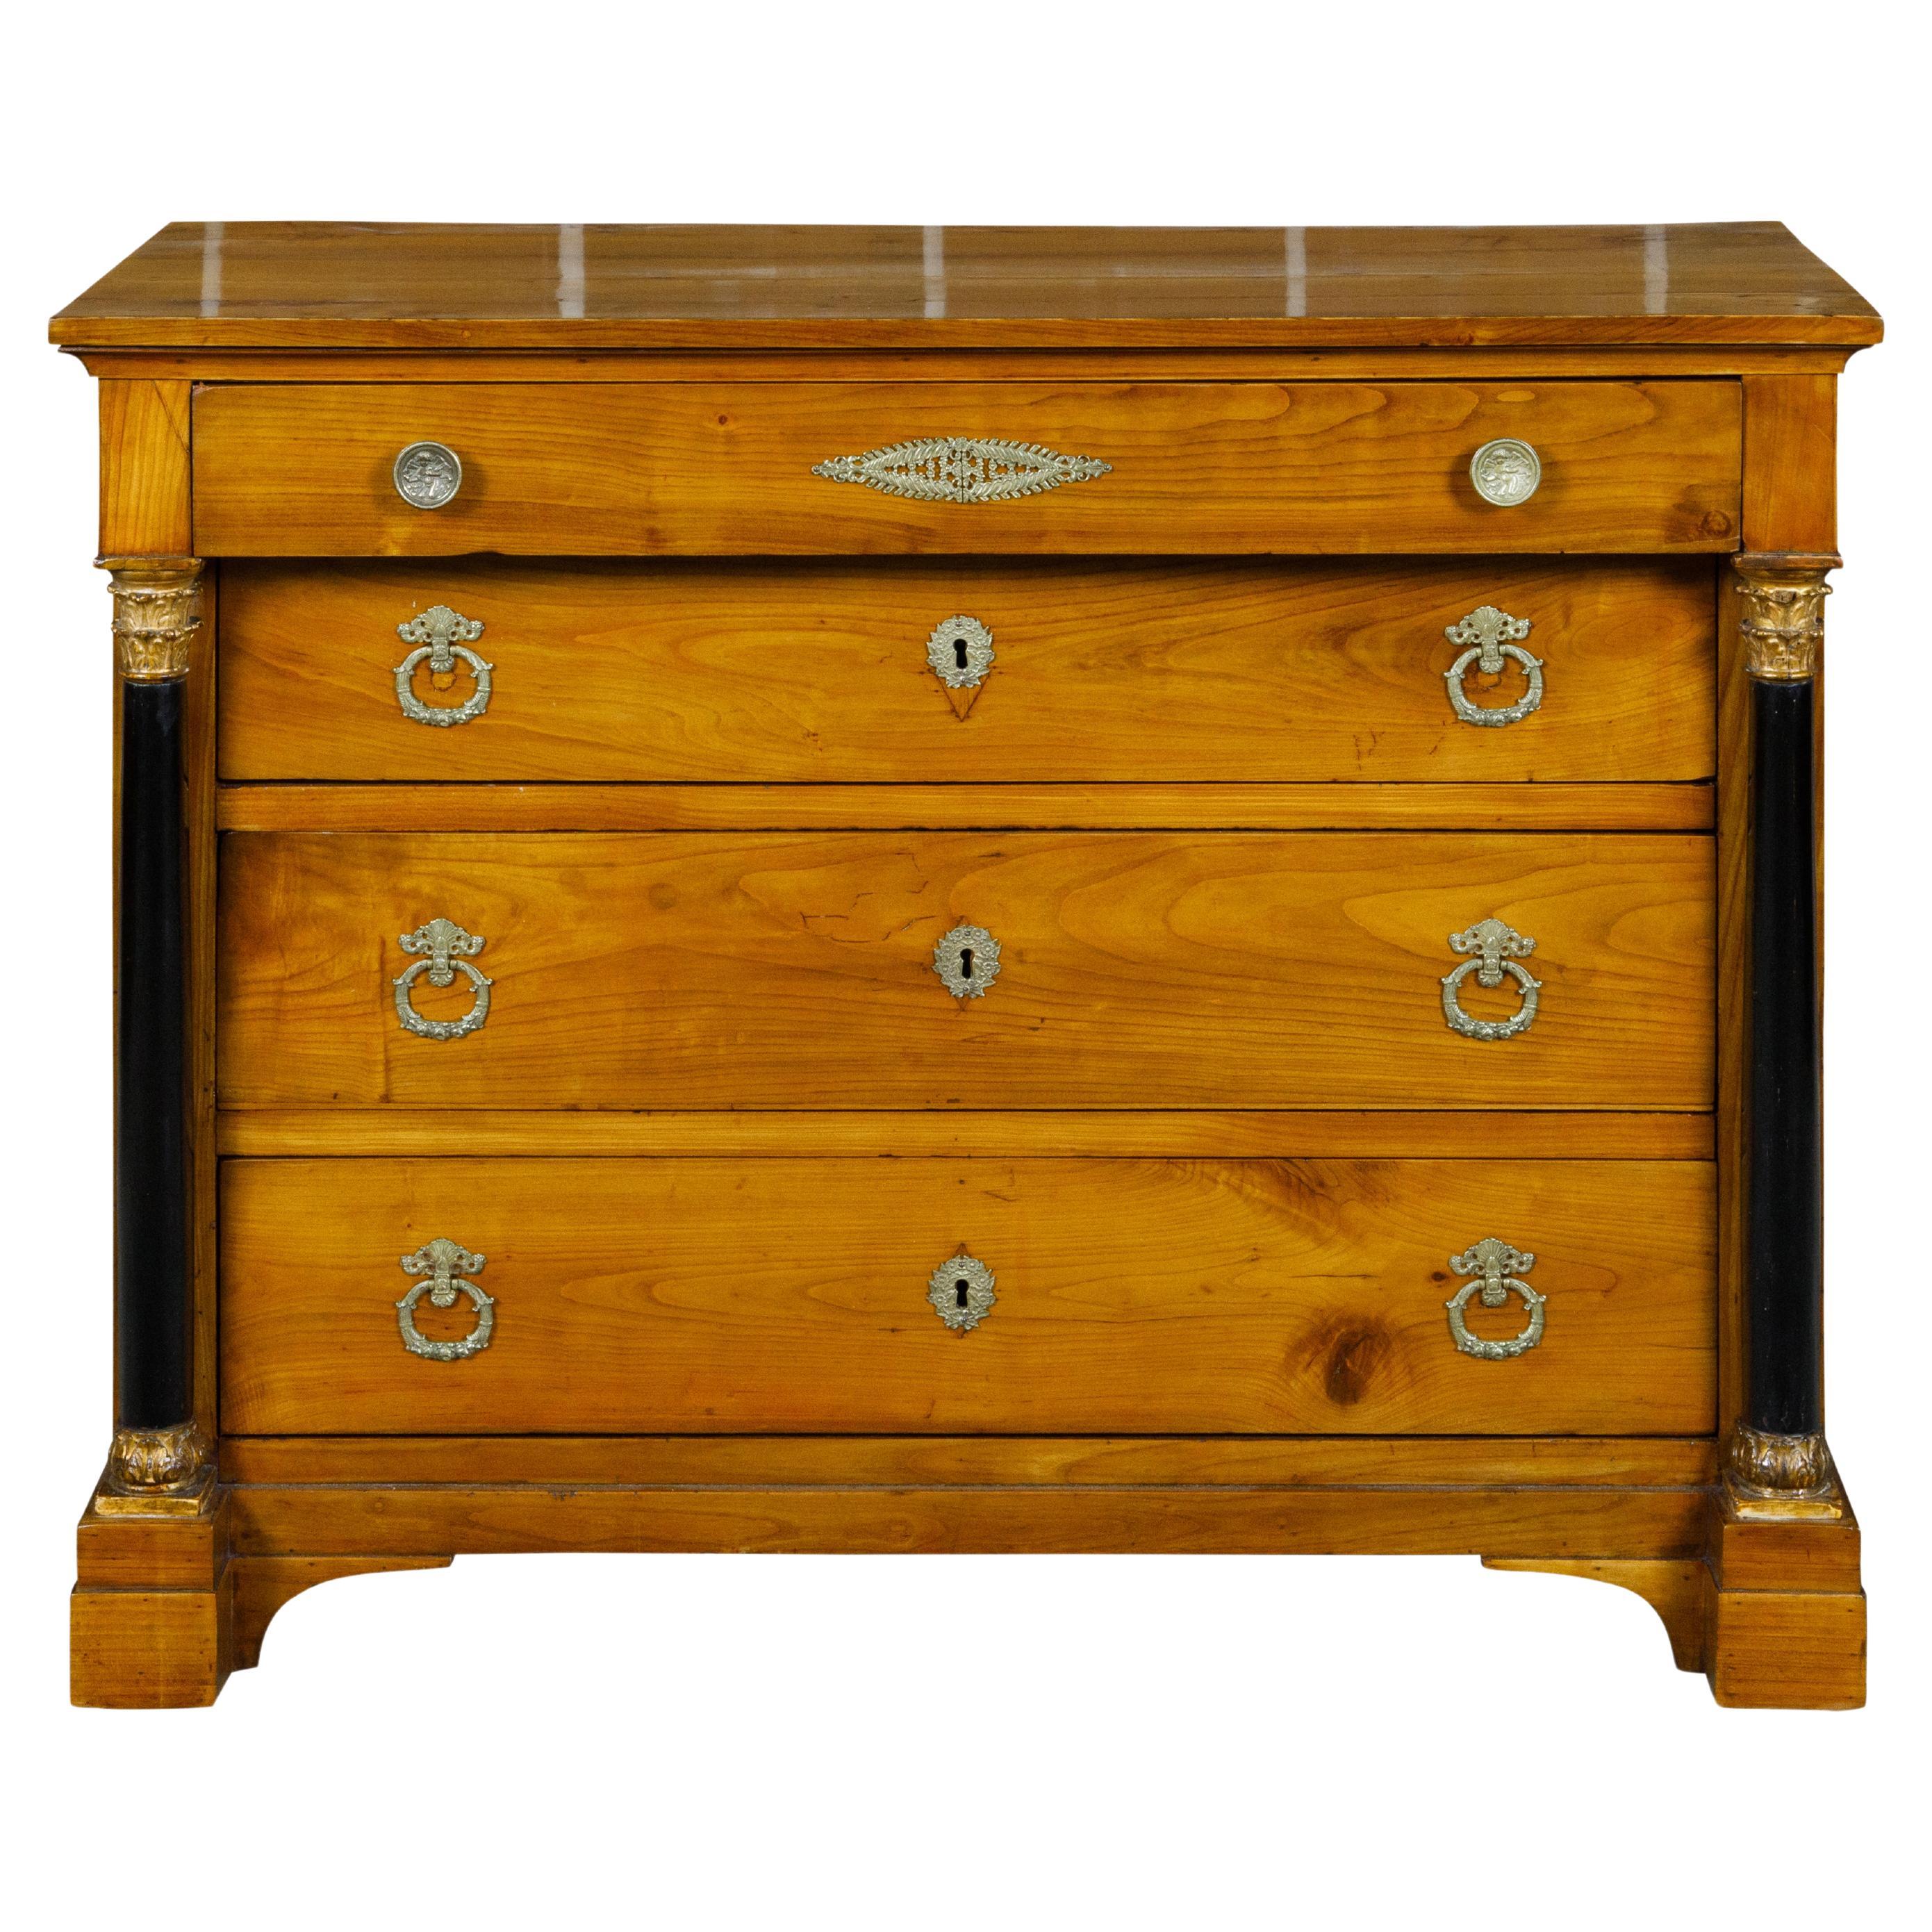 French Empire Fruitwood Four-Drawer Commode with Ebonized Corinthian Columns